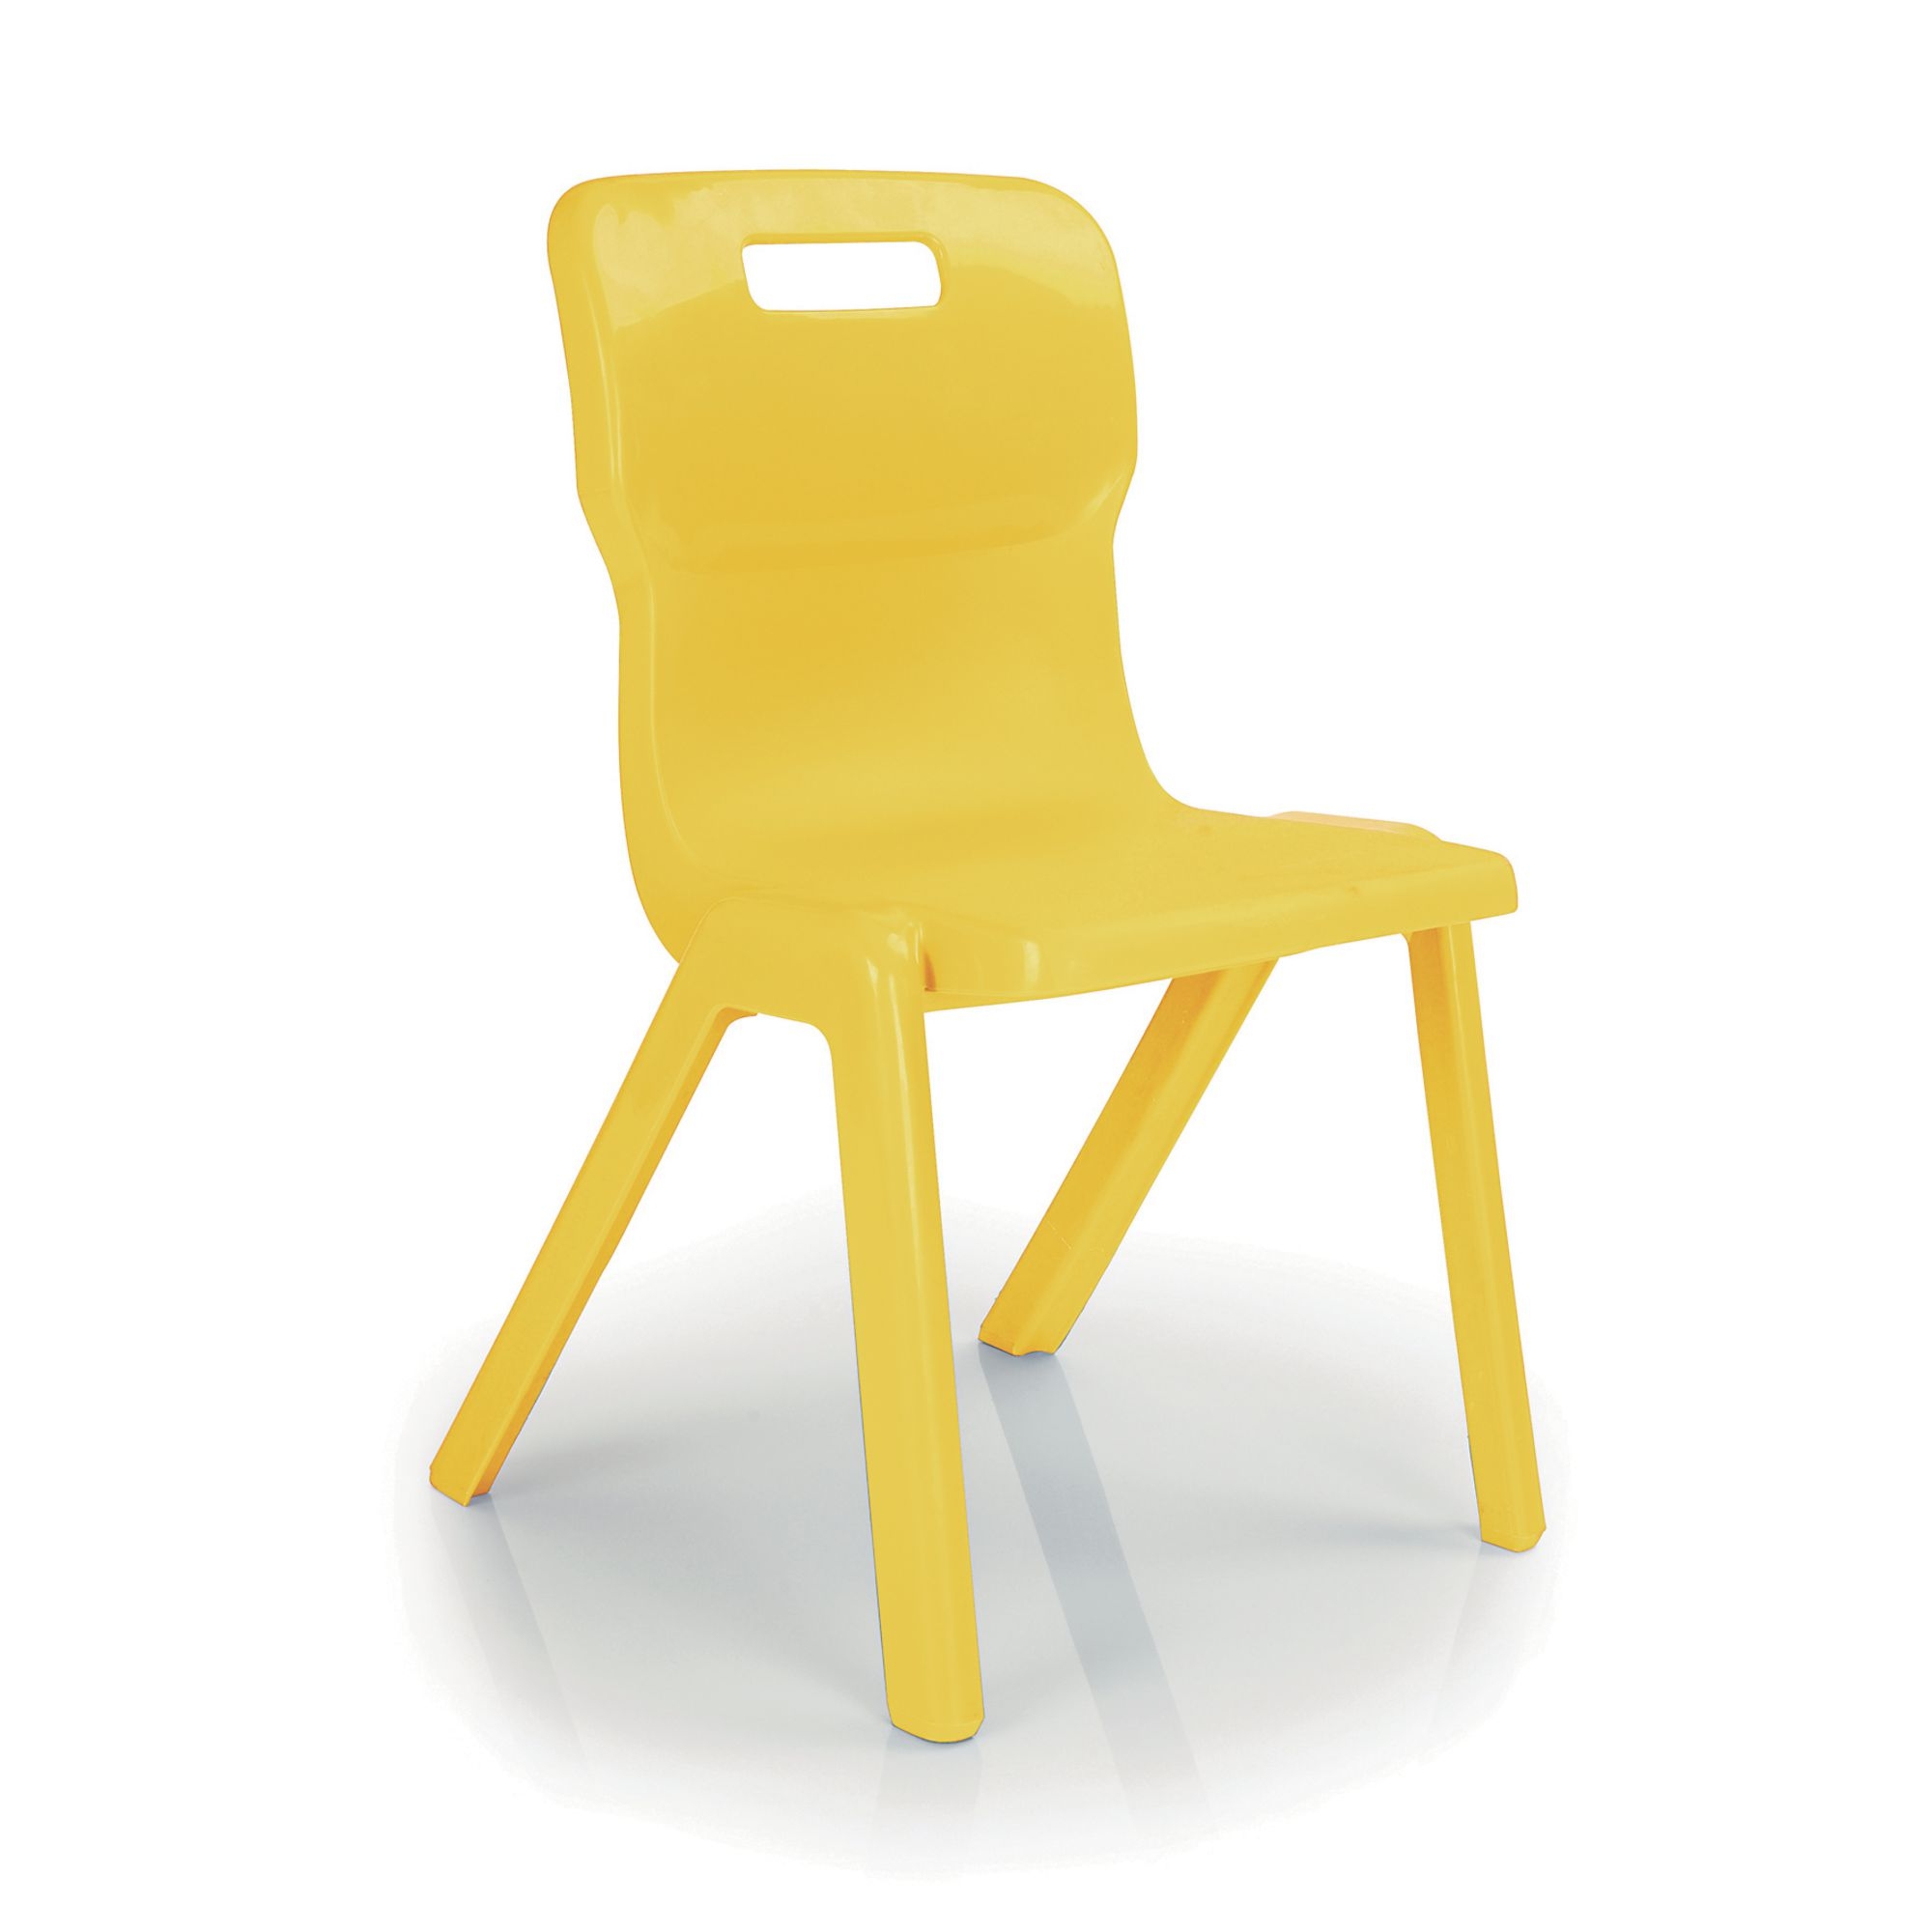 One Piece Titan Chair - Size 2 Ages 4-6 Yellow